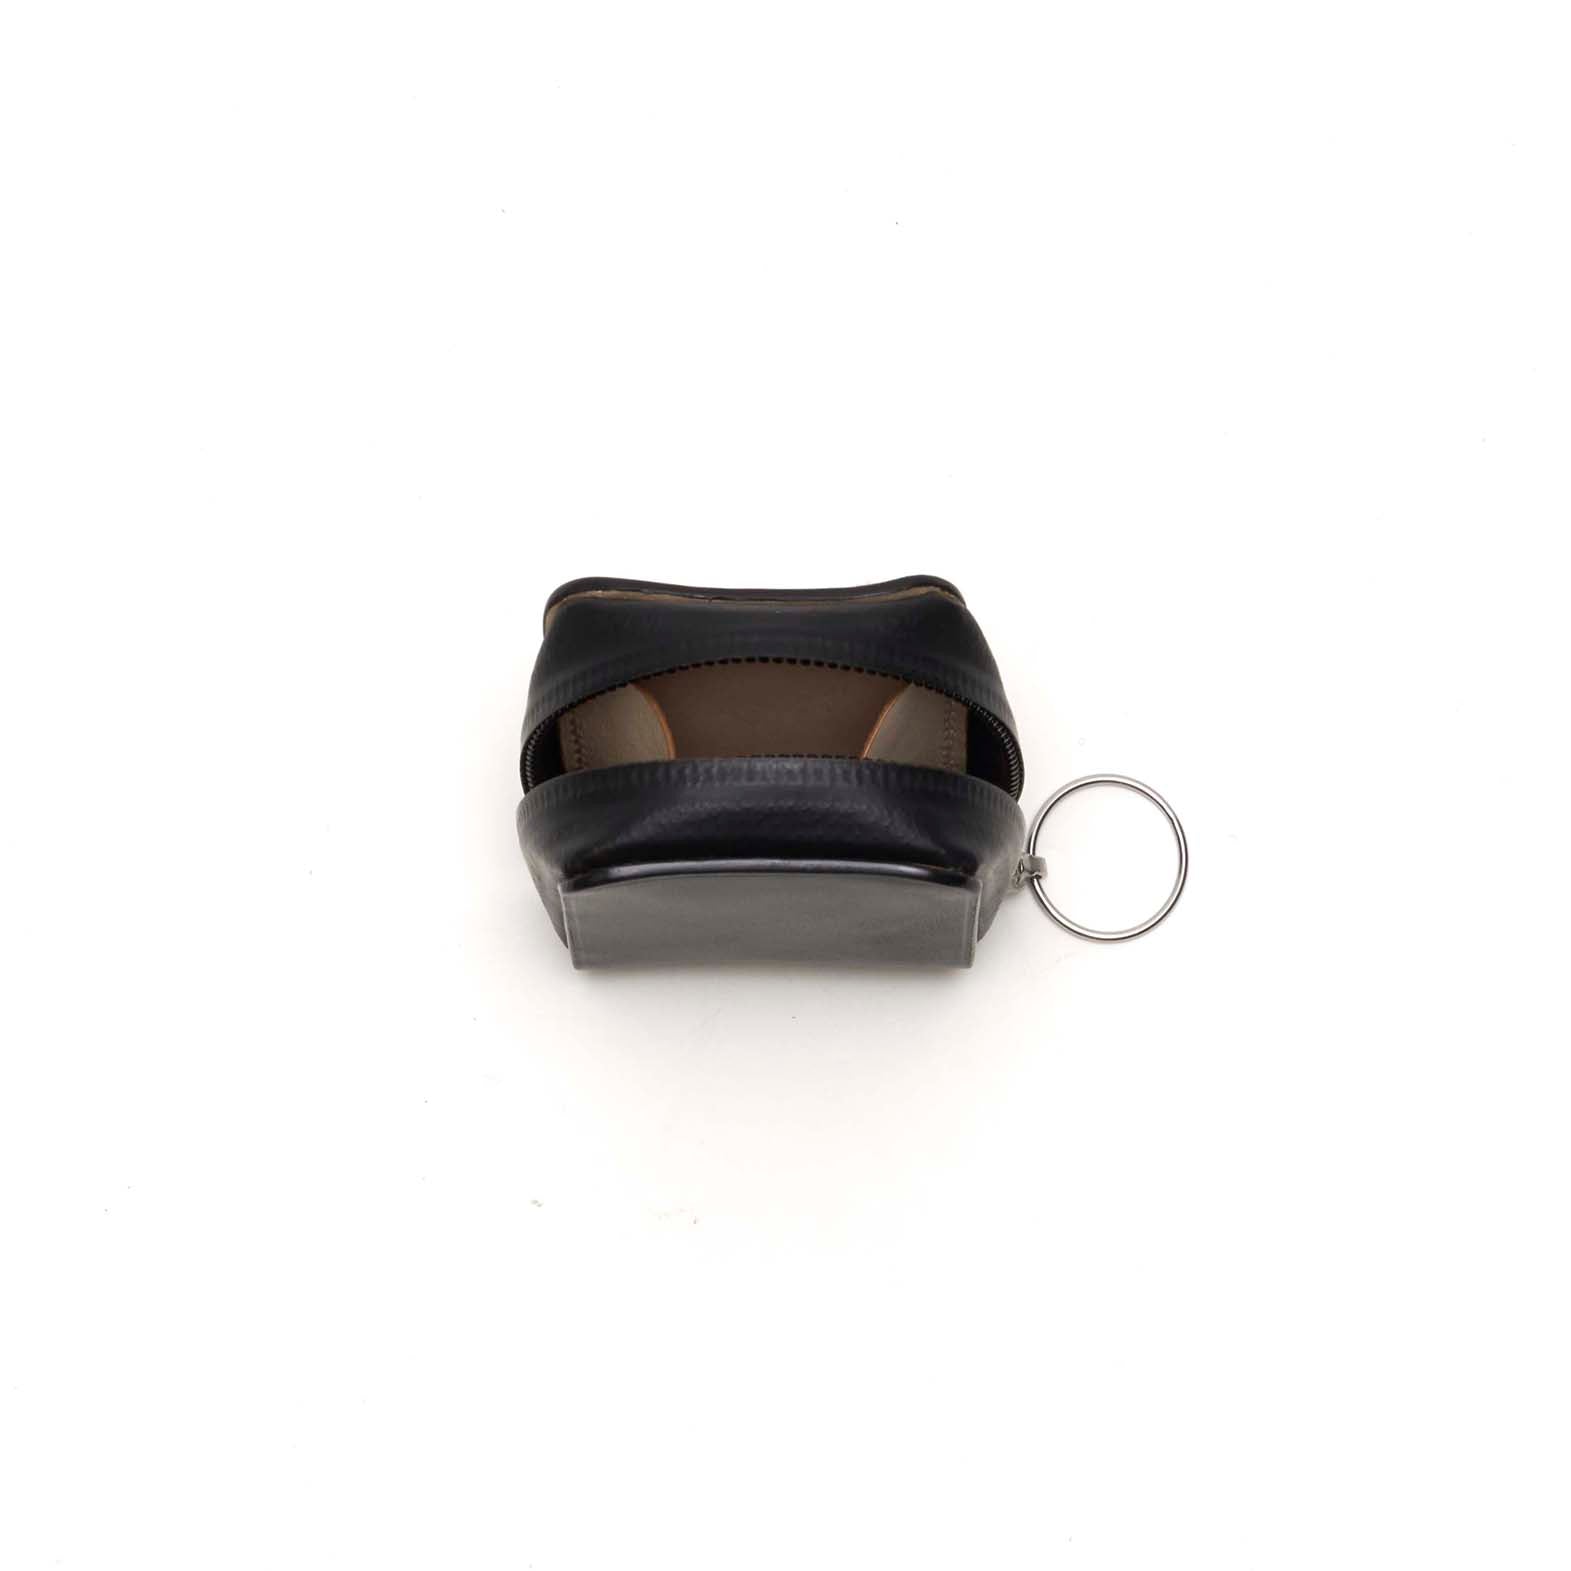 CEAL - STITCHLESS COIN / AIRPODS CASE